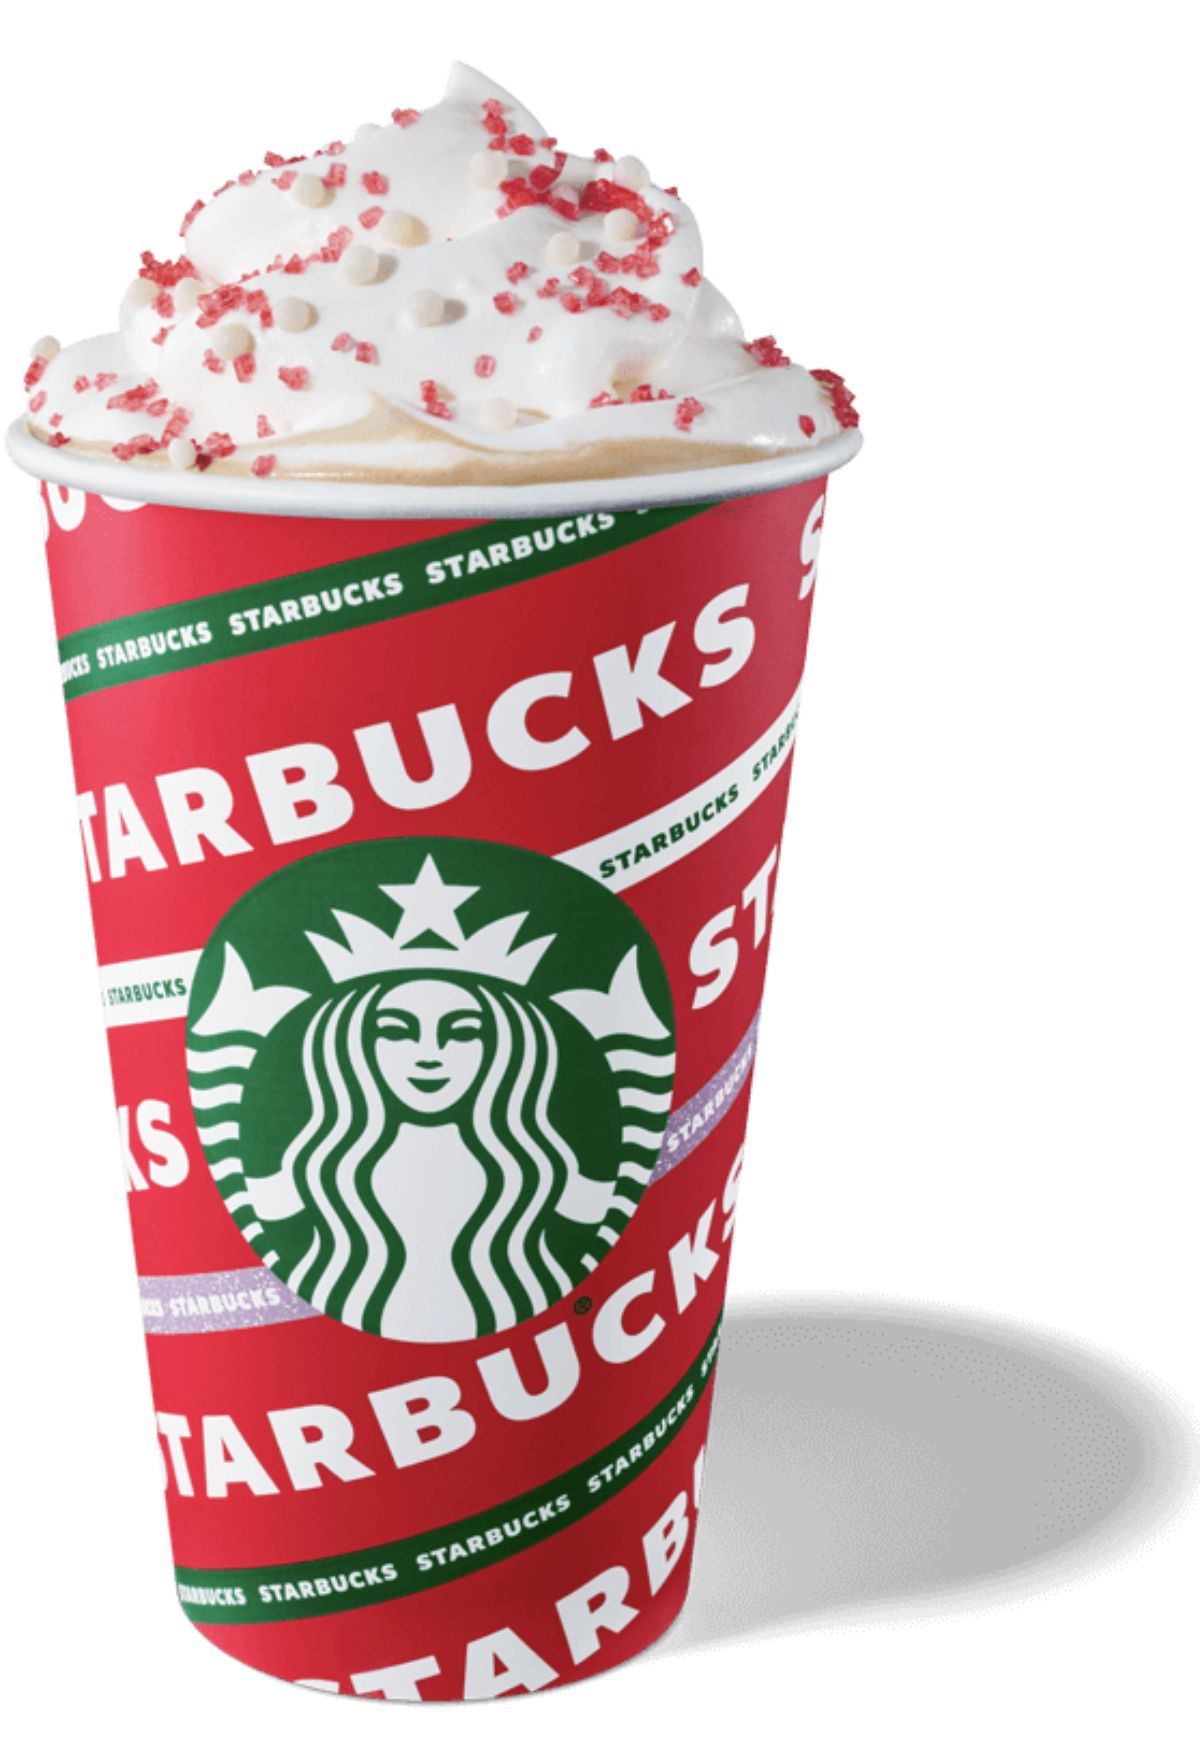 the candy cane starbucks Holiday cup 2021